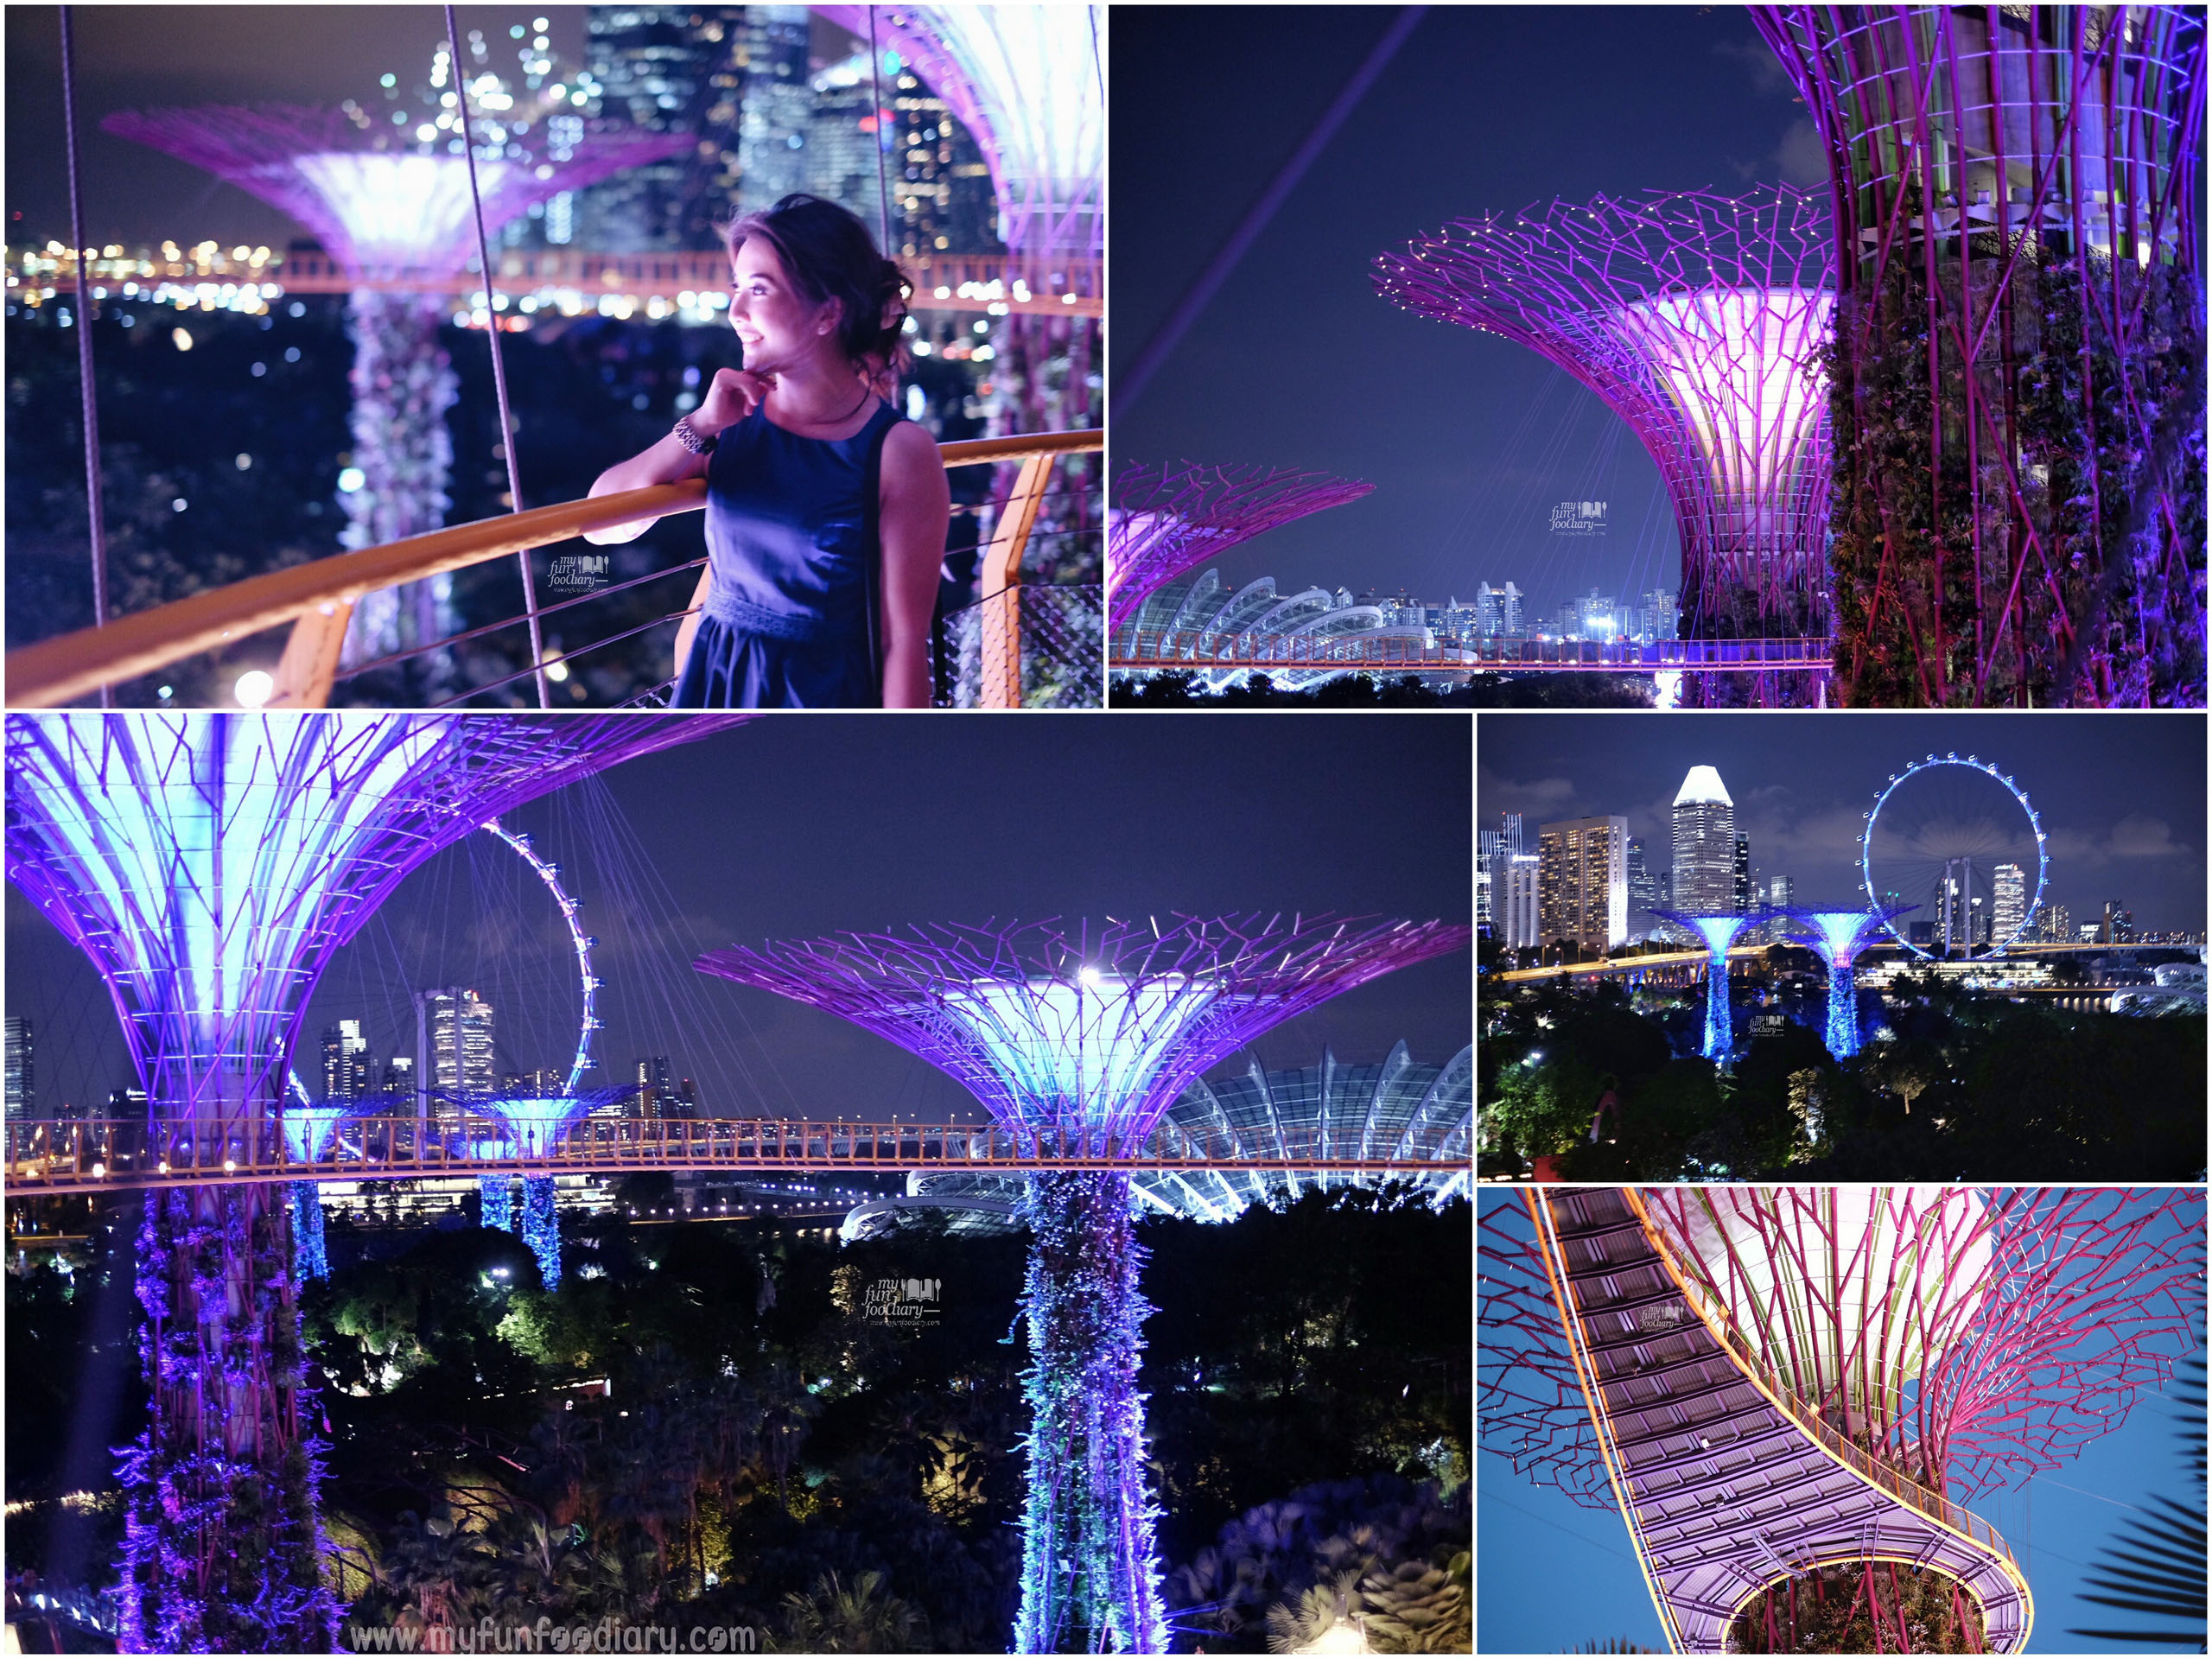 Experience OCBC Skywalk at Gardens By The Bay by Myfunfoodiary